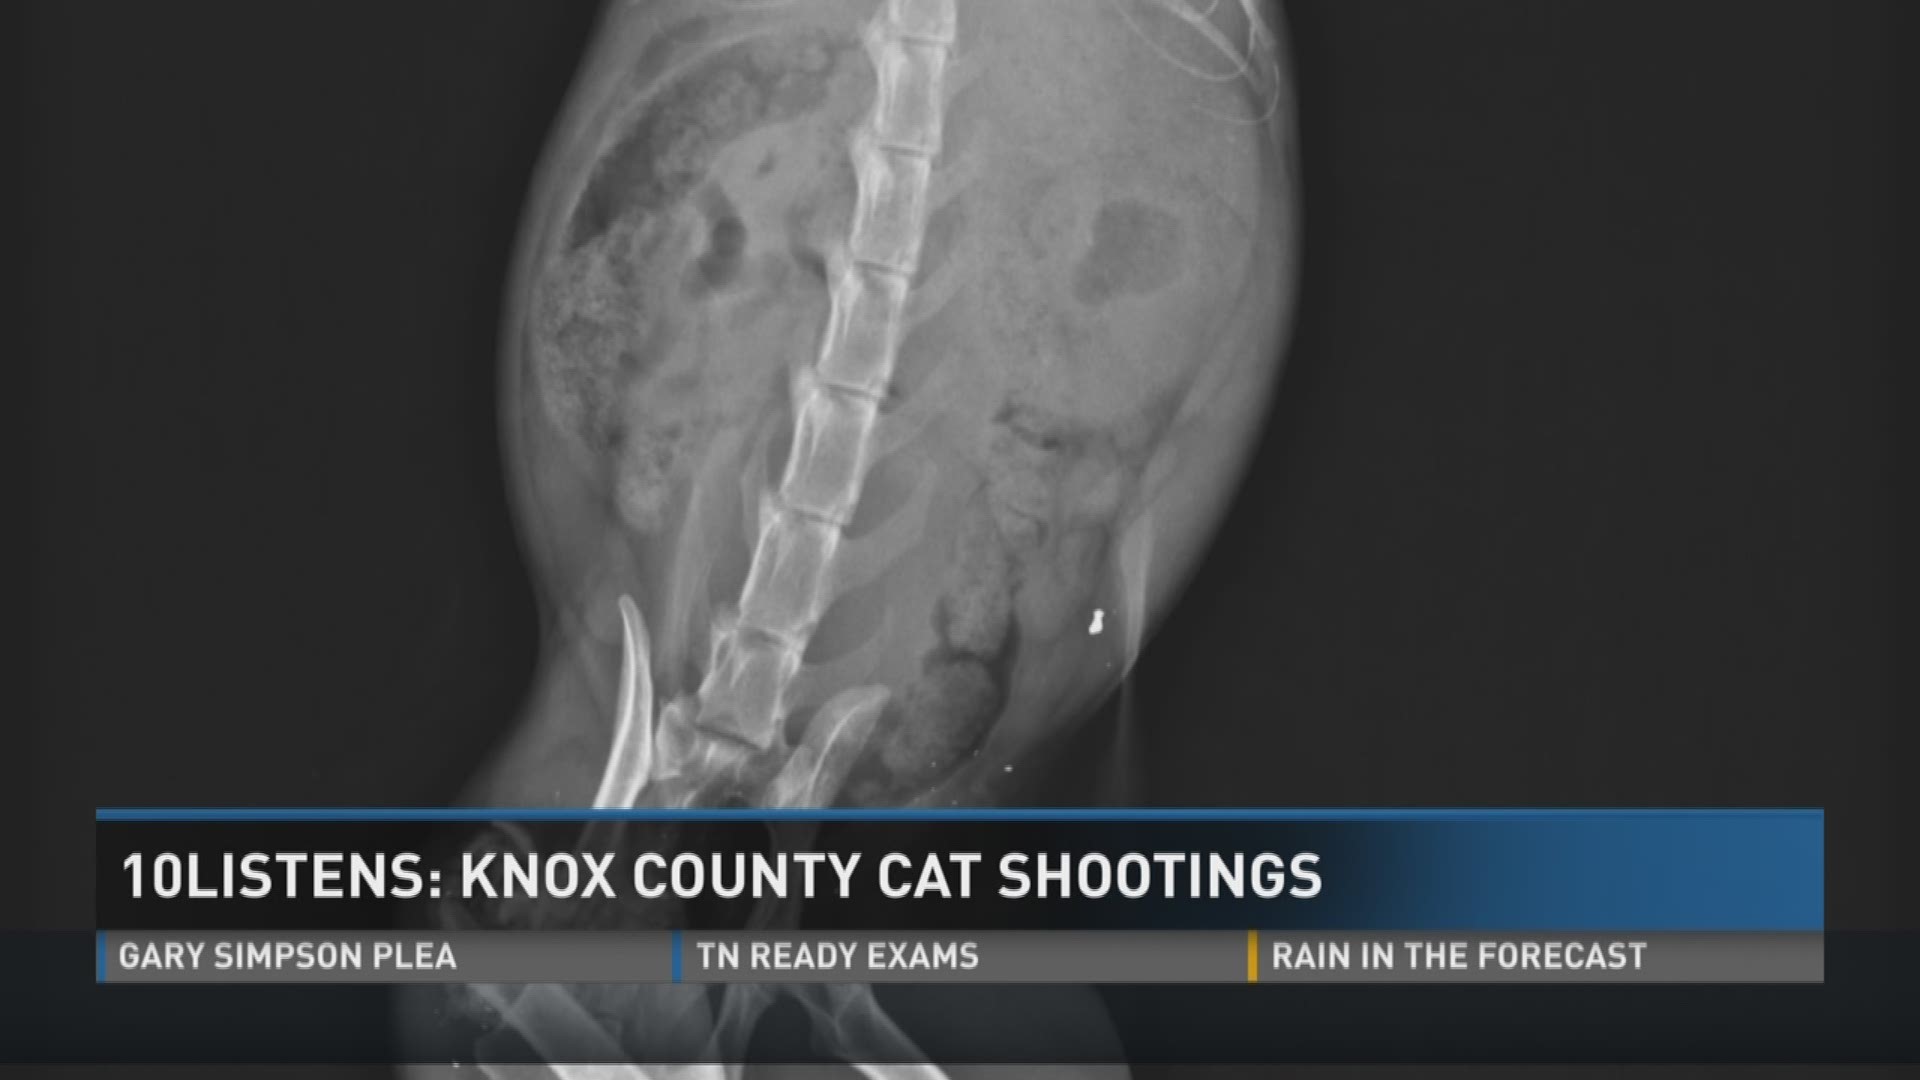 The Knox County Sheriff's Office is investigating reports of a family's cat shot with an arrow. But this isn't the only  cat shooting in that area recently. (4/17/17 5 pm)